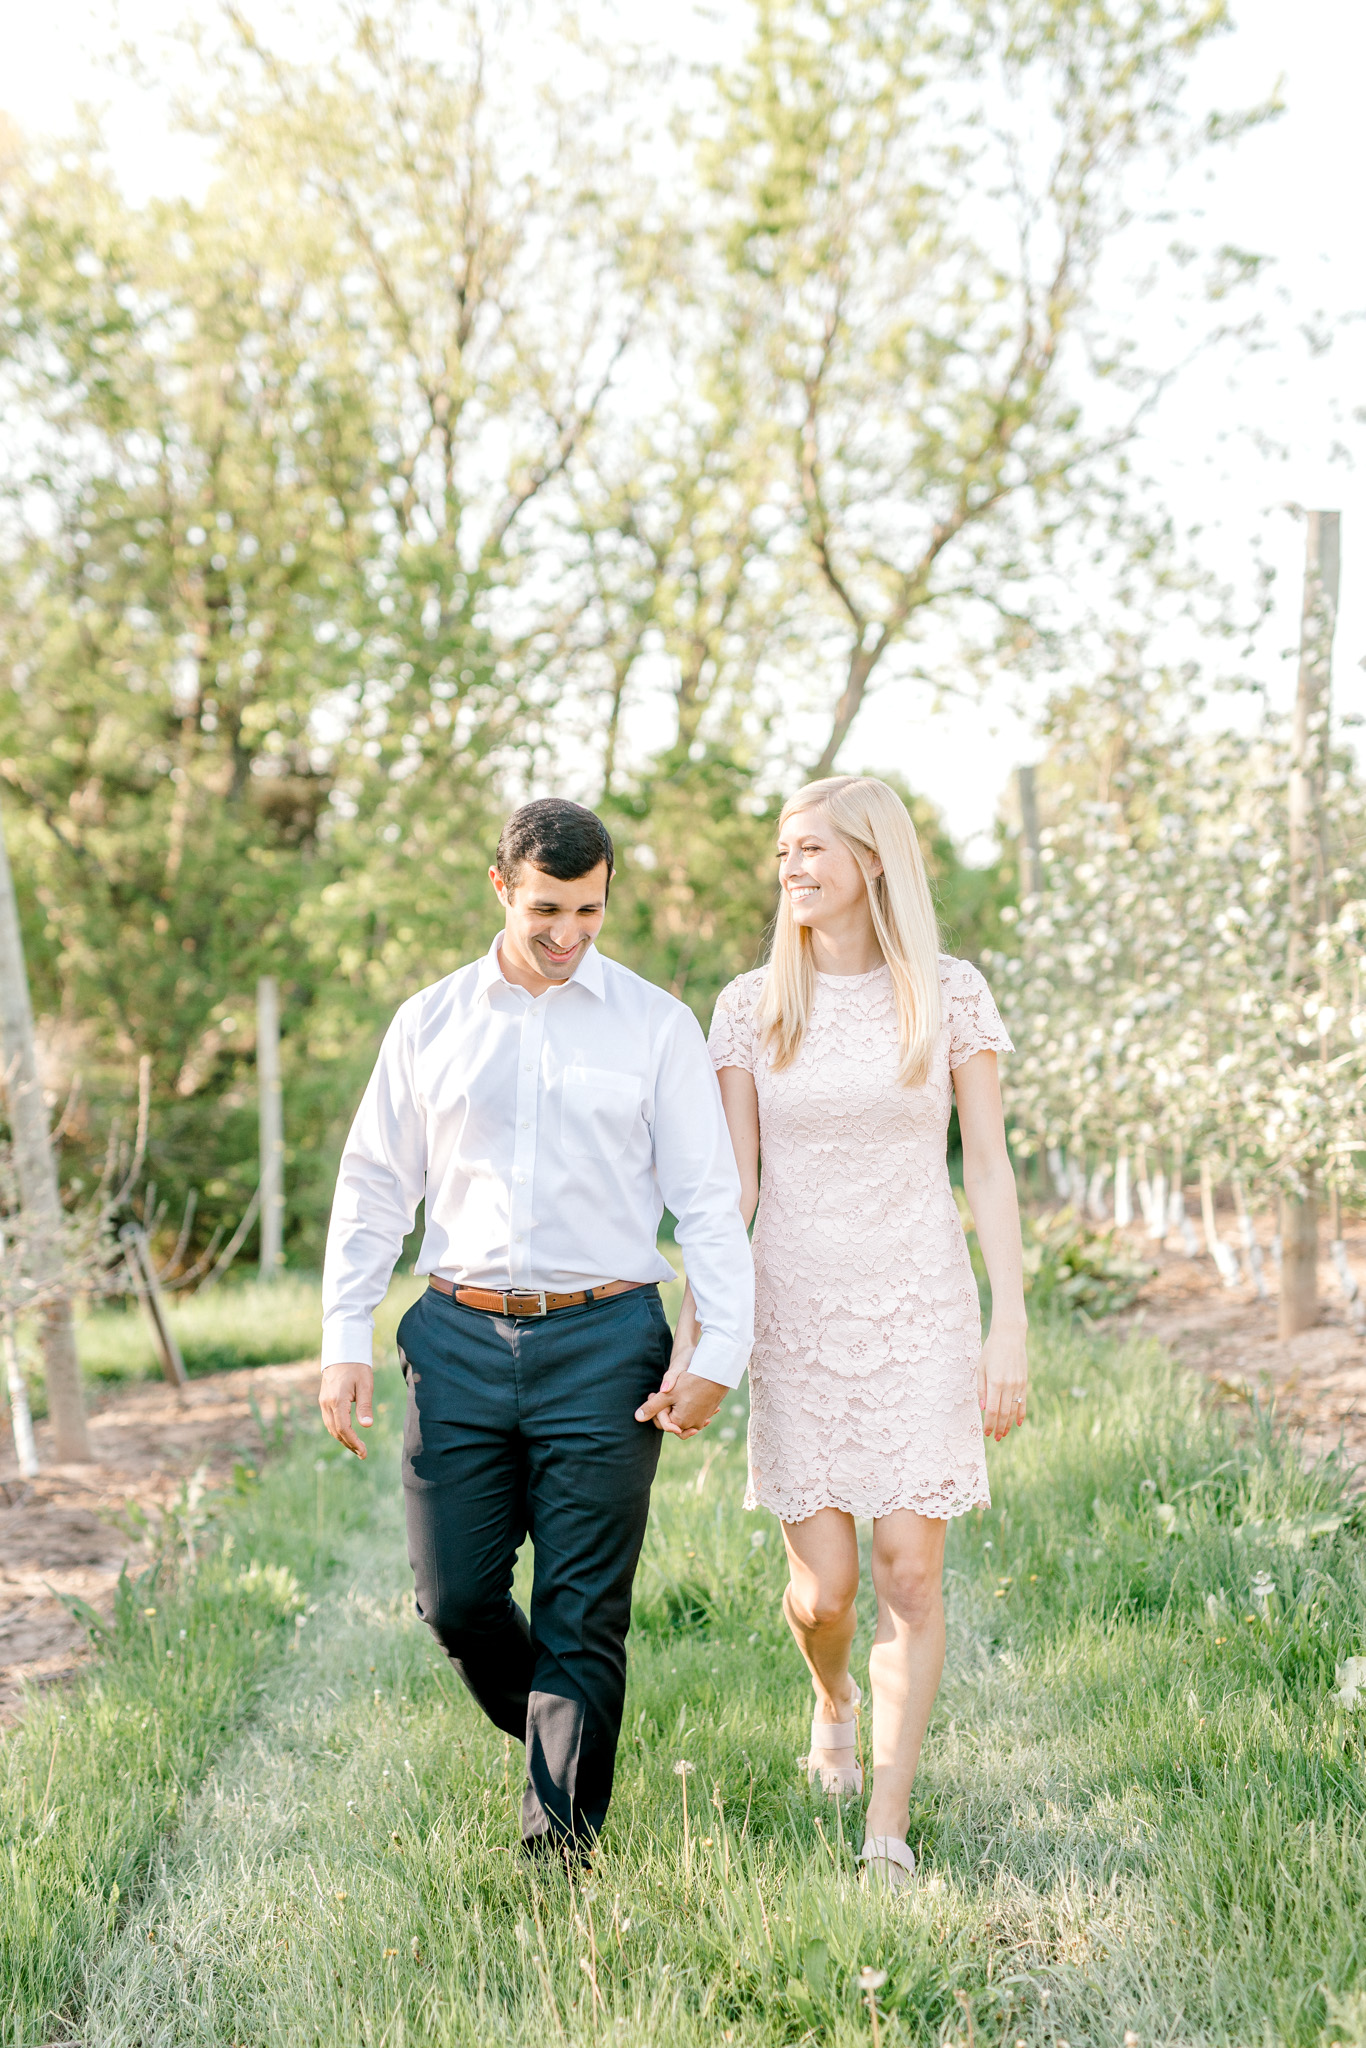 A sweet spring engagement session at the orchard | laurenda marie photography | west michigan weddings | west michigan engagement